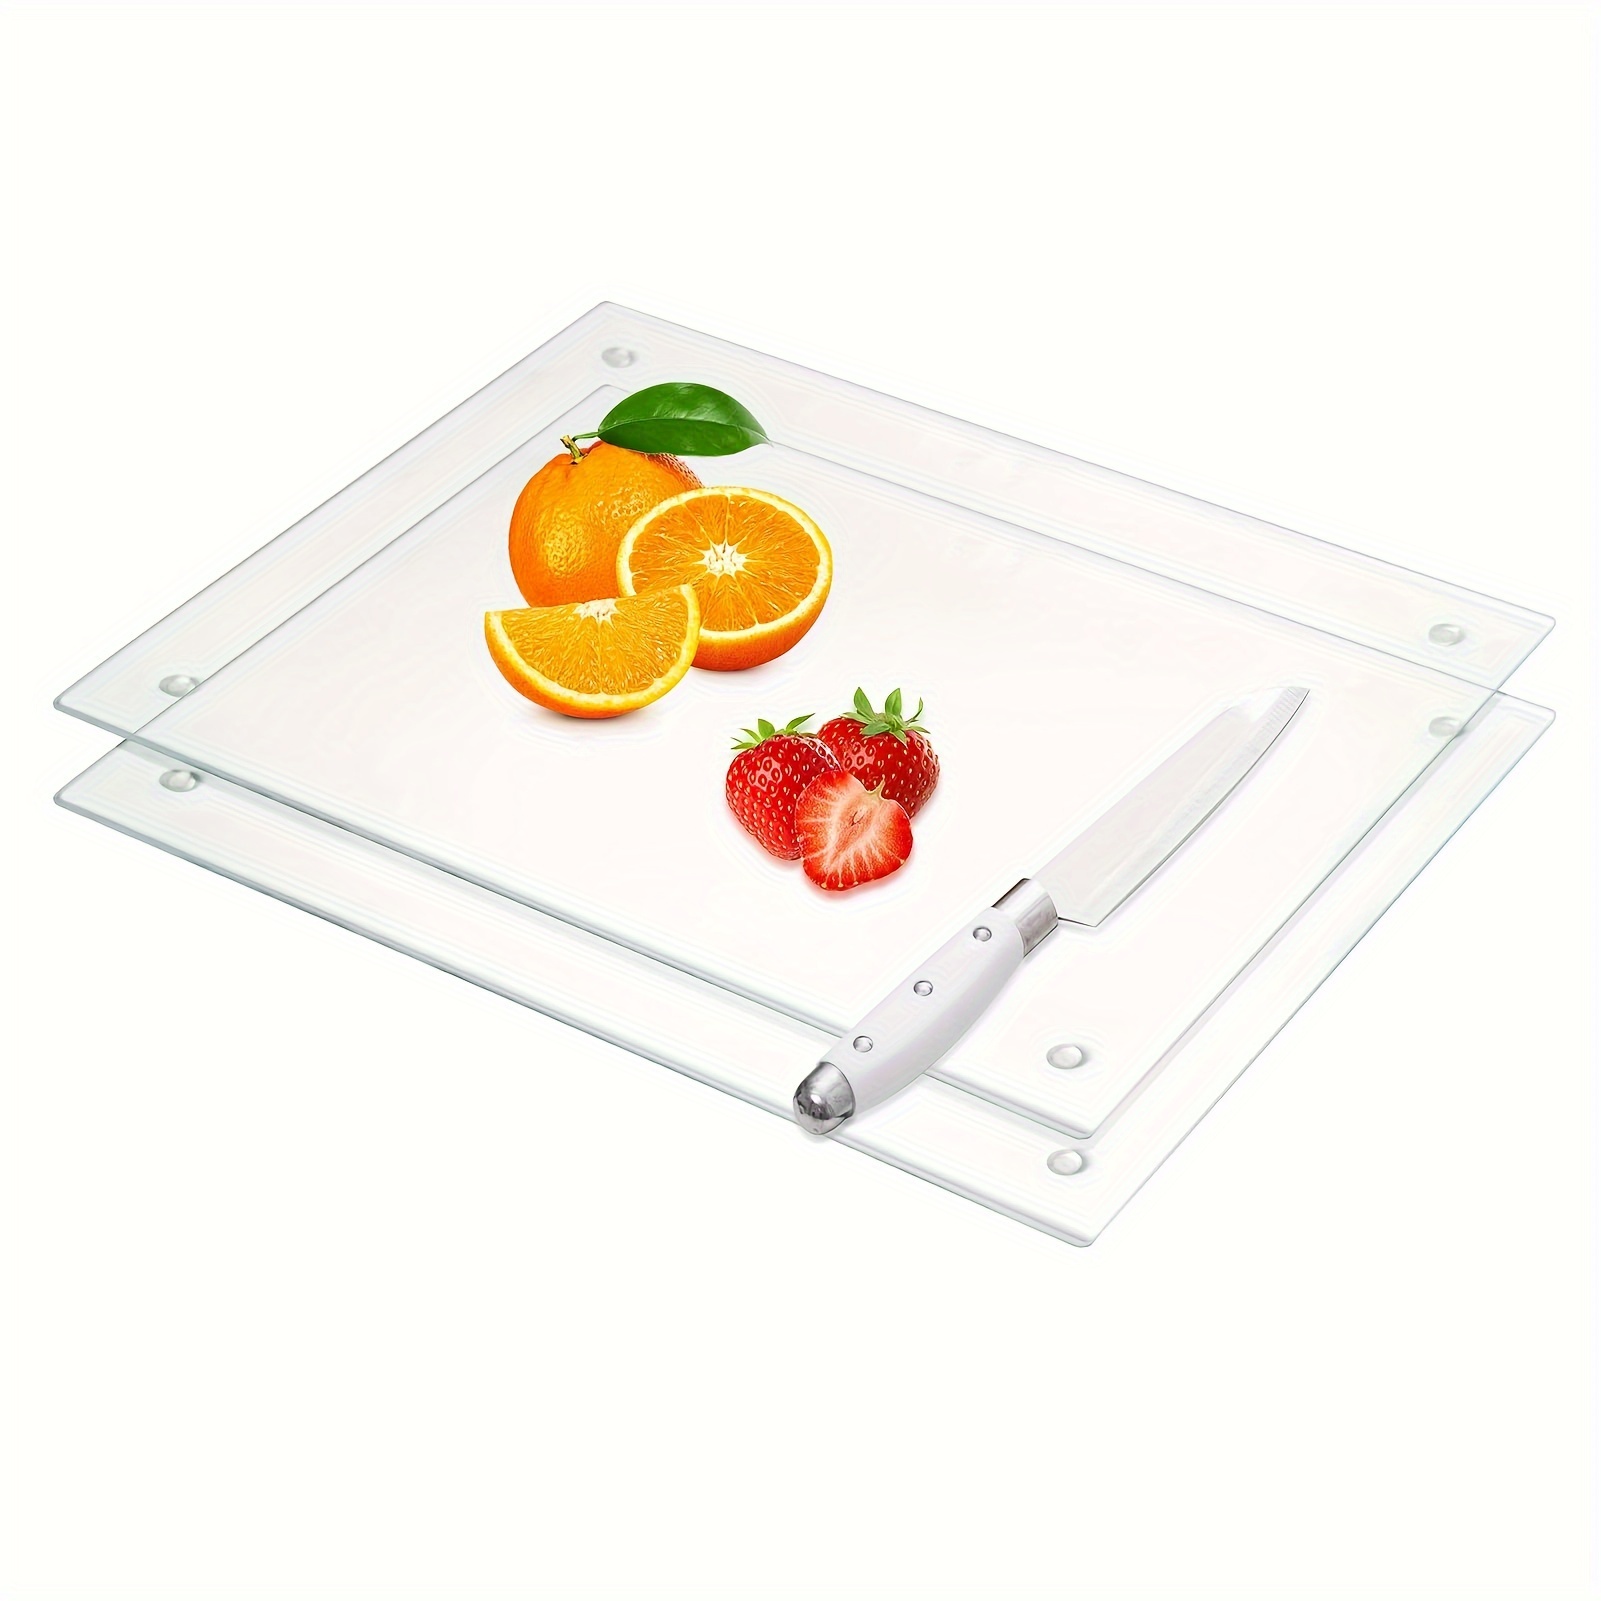 

Shatter-resistant Tempered Glass Cutting Board Set Of 2 - Heat-resistant, Dishwasher-safe Kitchen Boards, Food-safe Transparent Prep Mats For Chopping, Serving Tray Use - 11.8" X 7.87